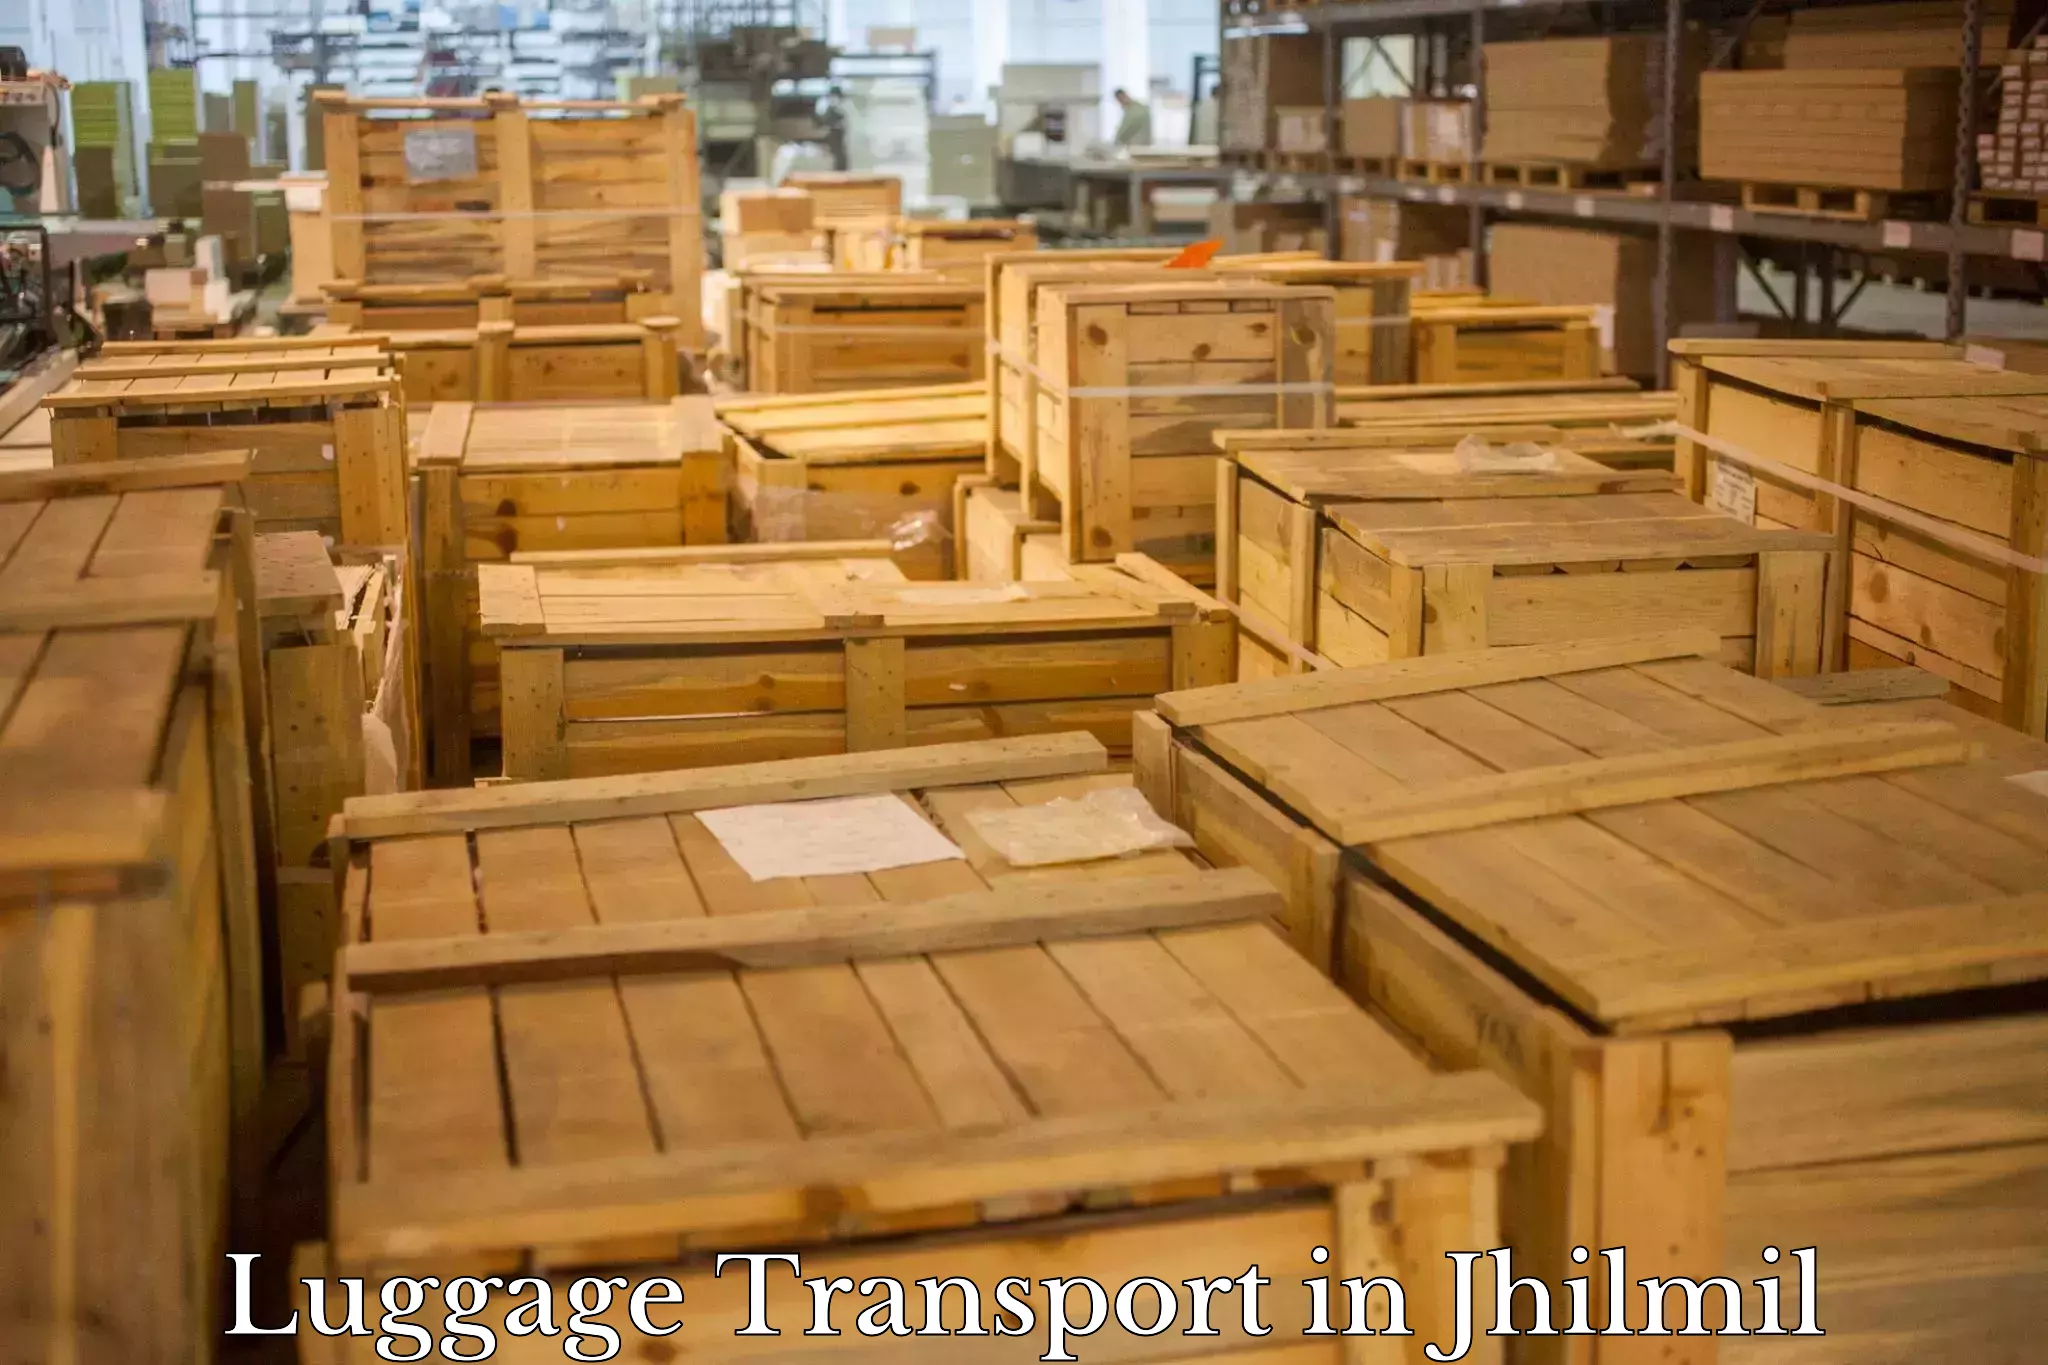 Long distance luggage transport in Jhilmil